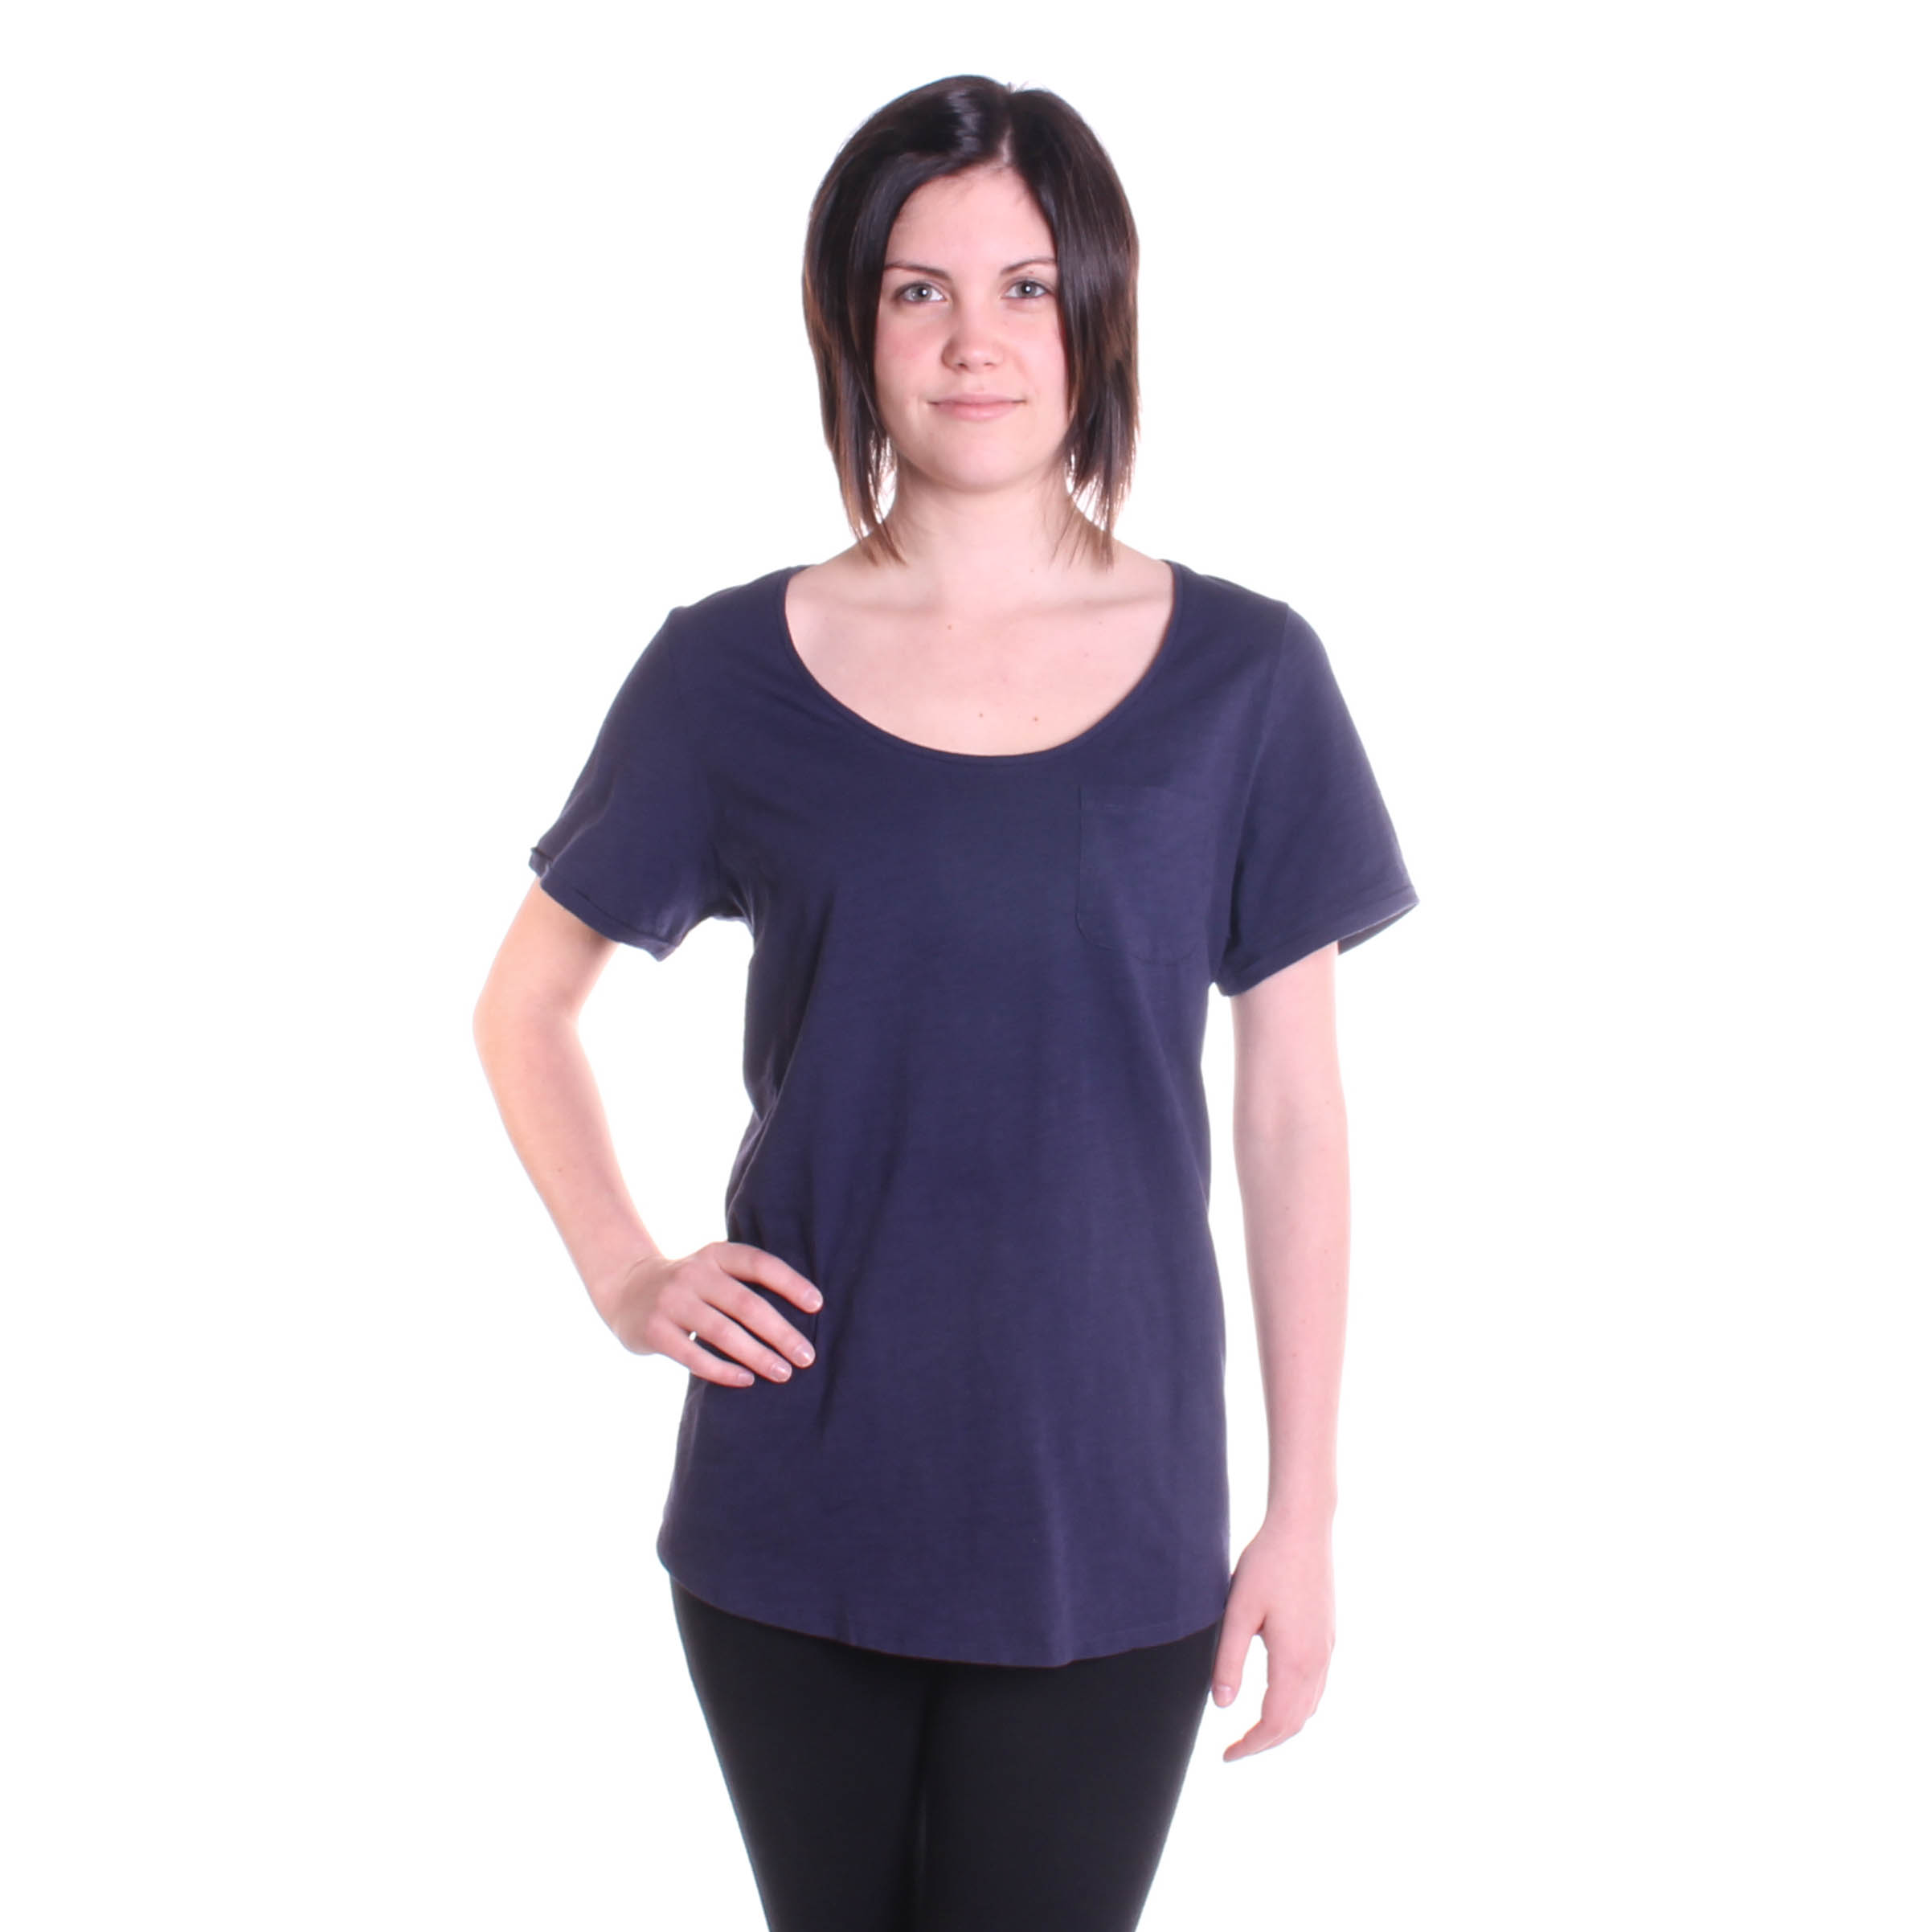 Joules Women's Daily Top